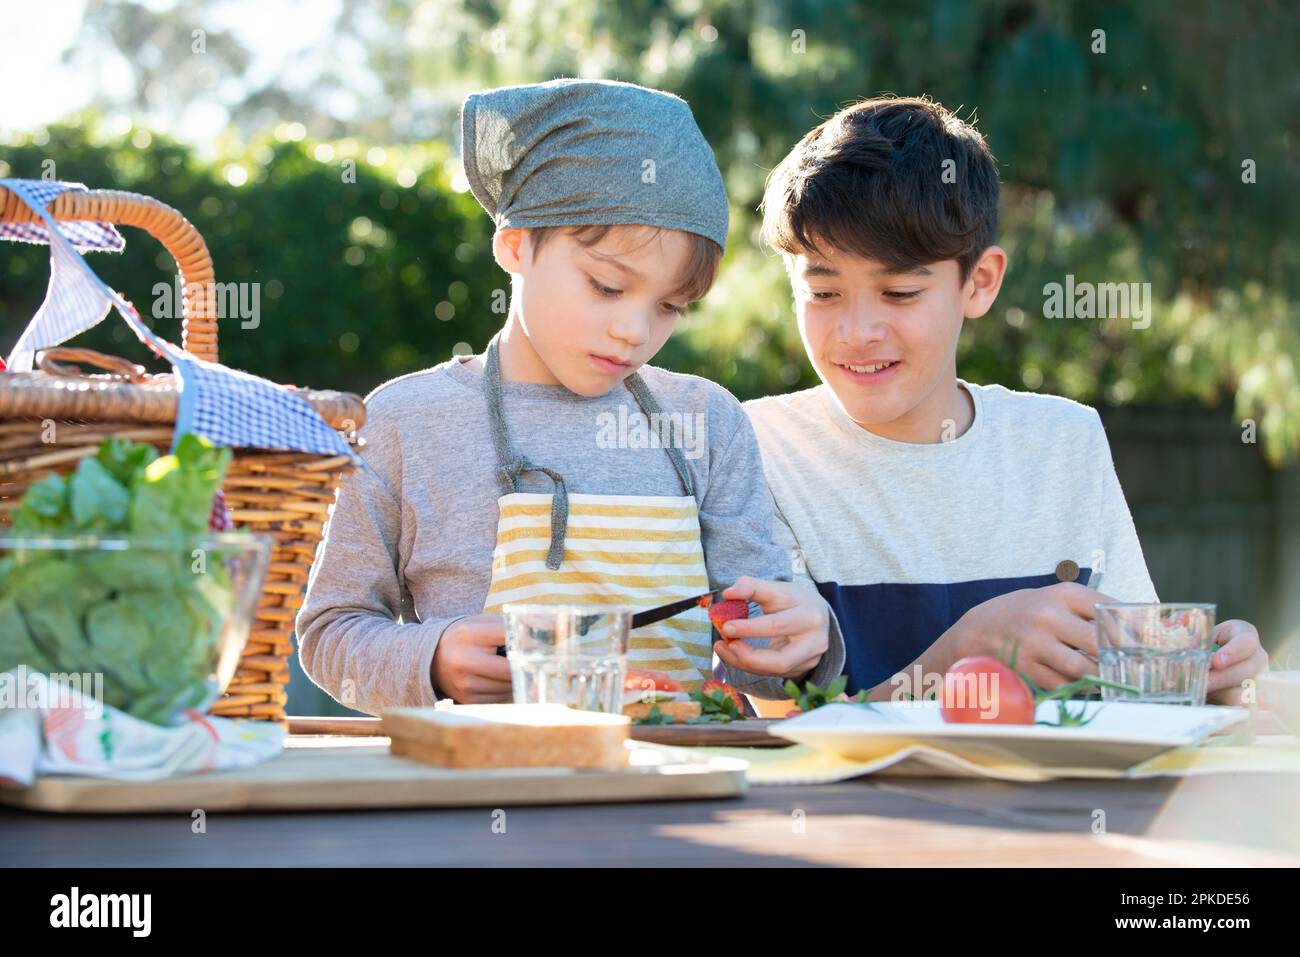 Brothers making sandwiches in the garden Stock Photo